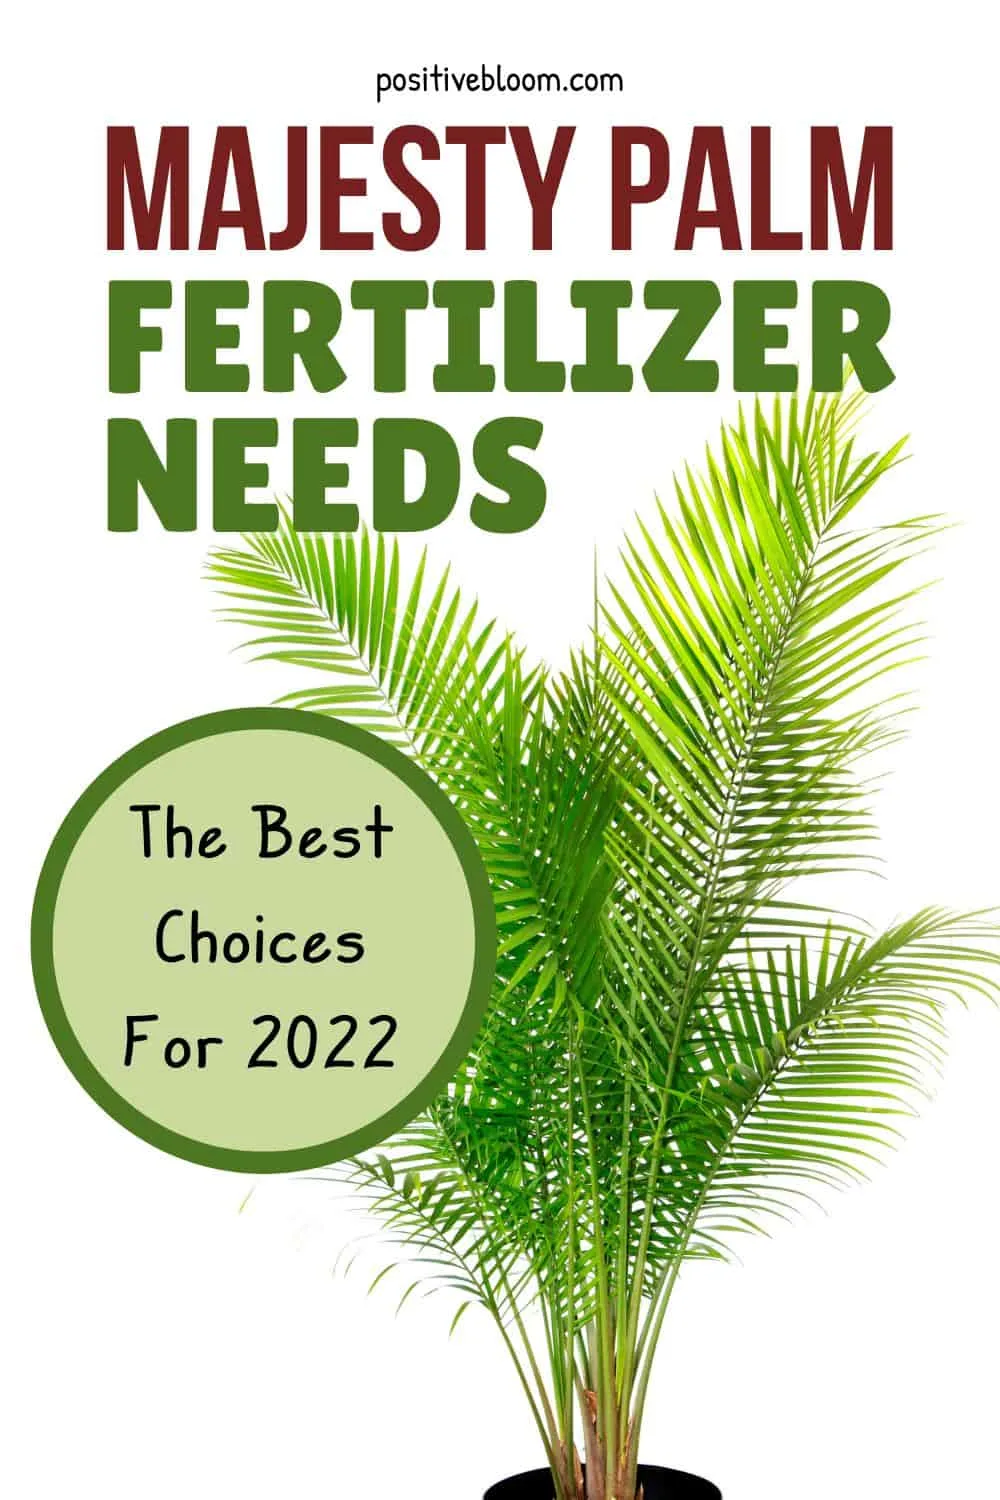 Majesty Palm Fertilizer Needs And The Best Choices For 2022 Pinterest